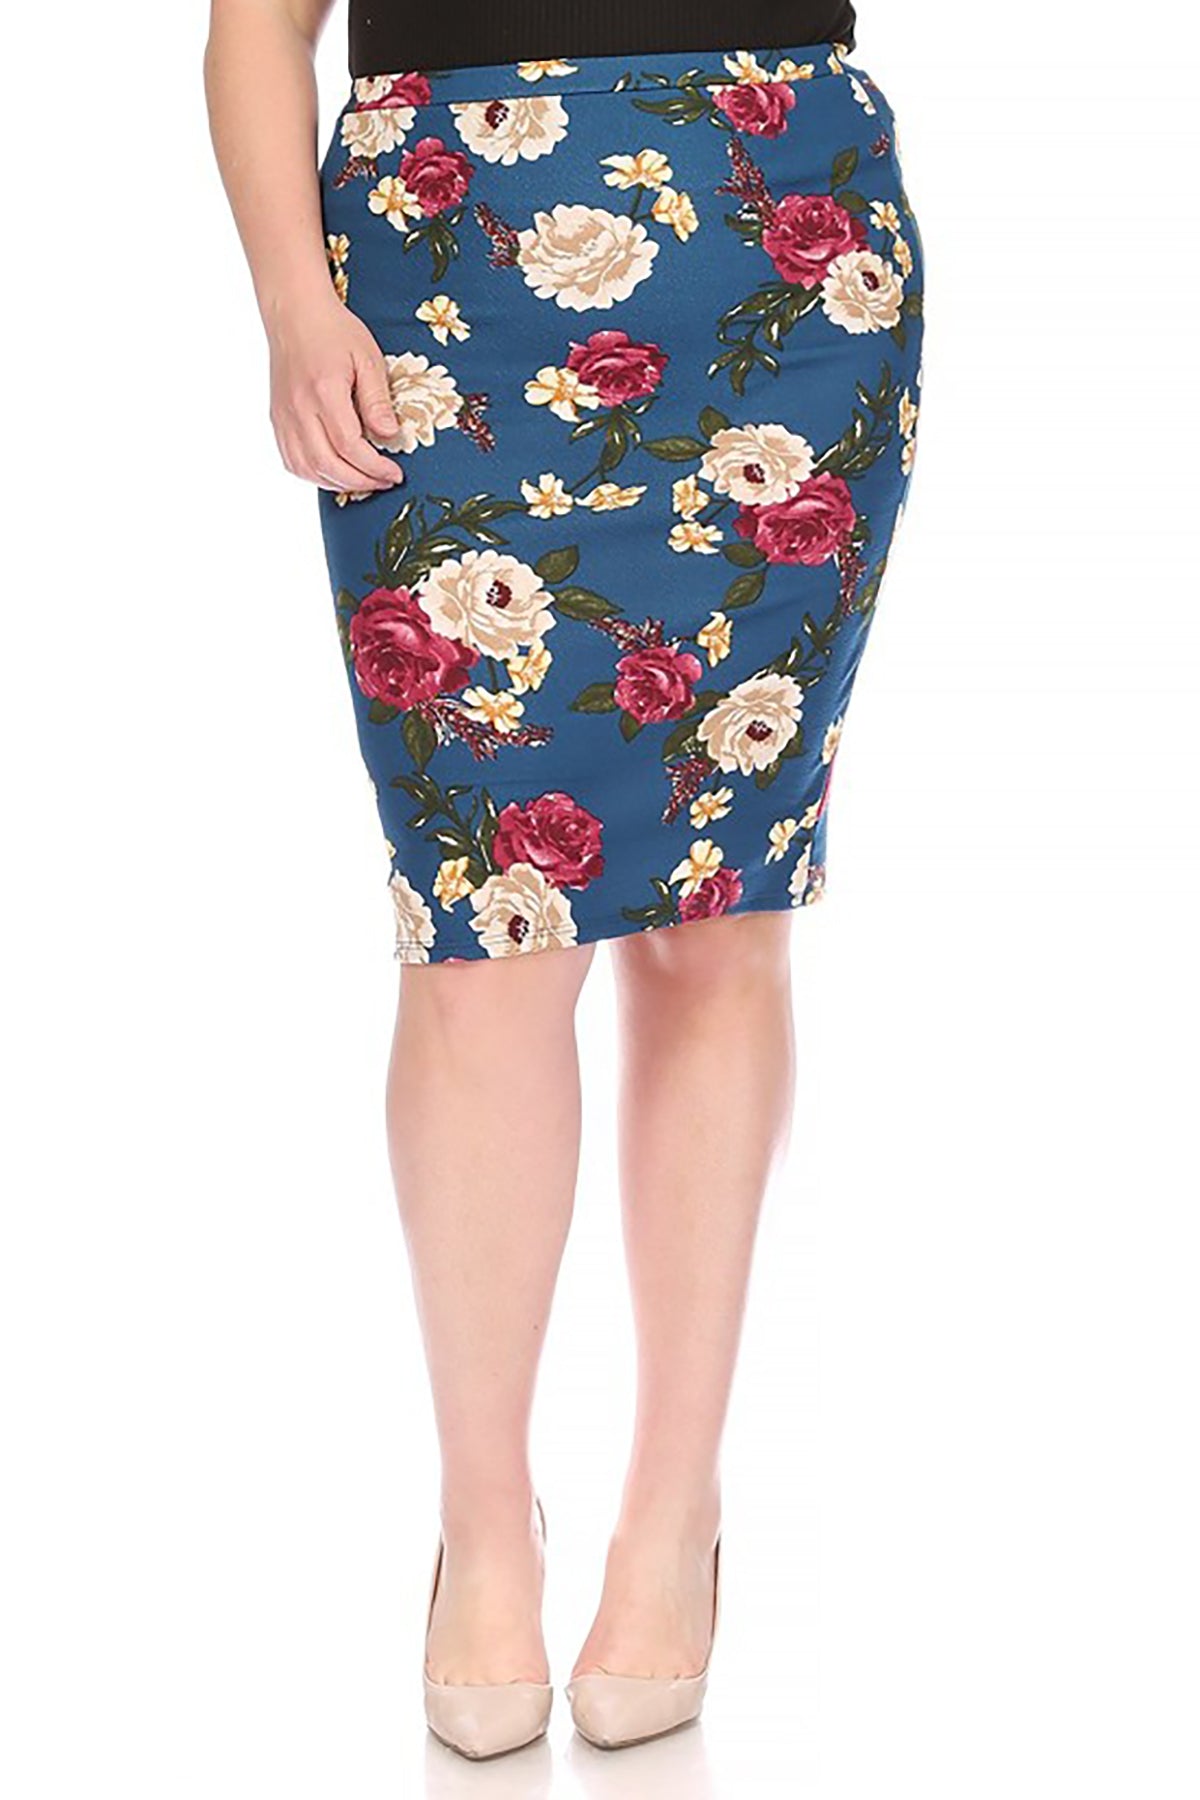 Women's Plus size Floral Print Knee Length Pencil Skirt Fitted style